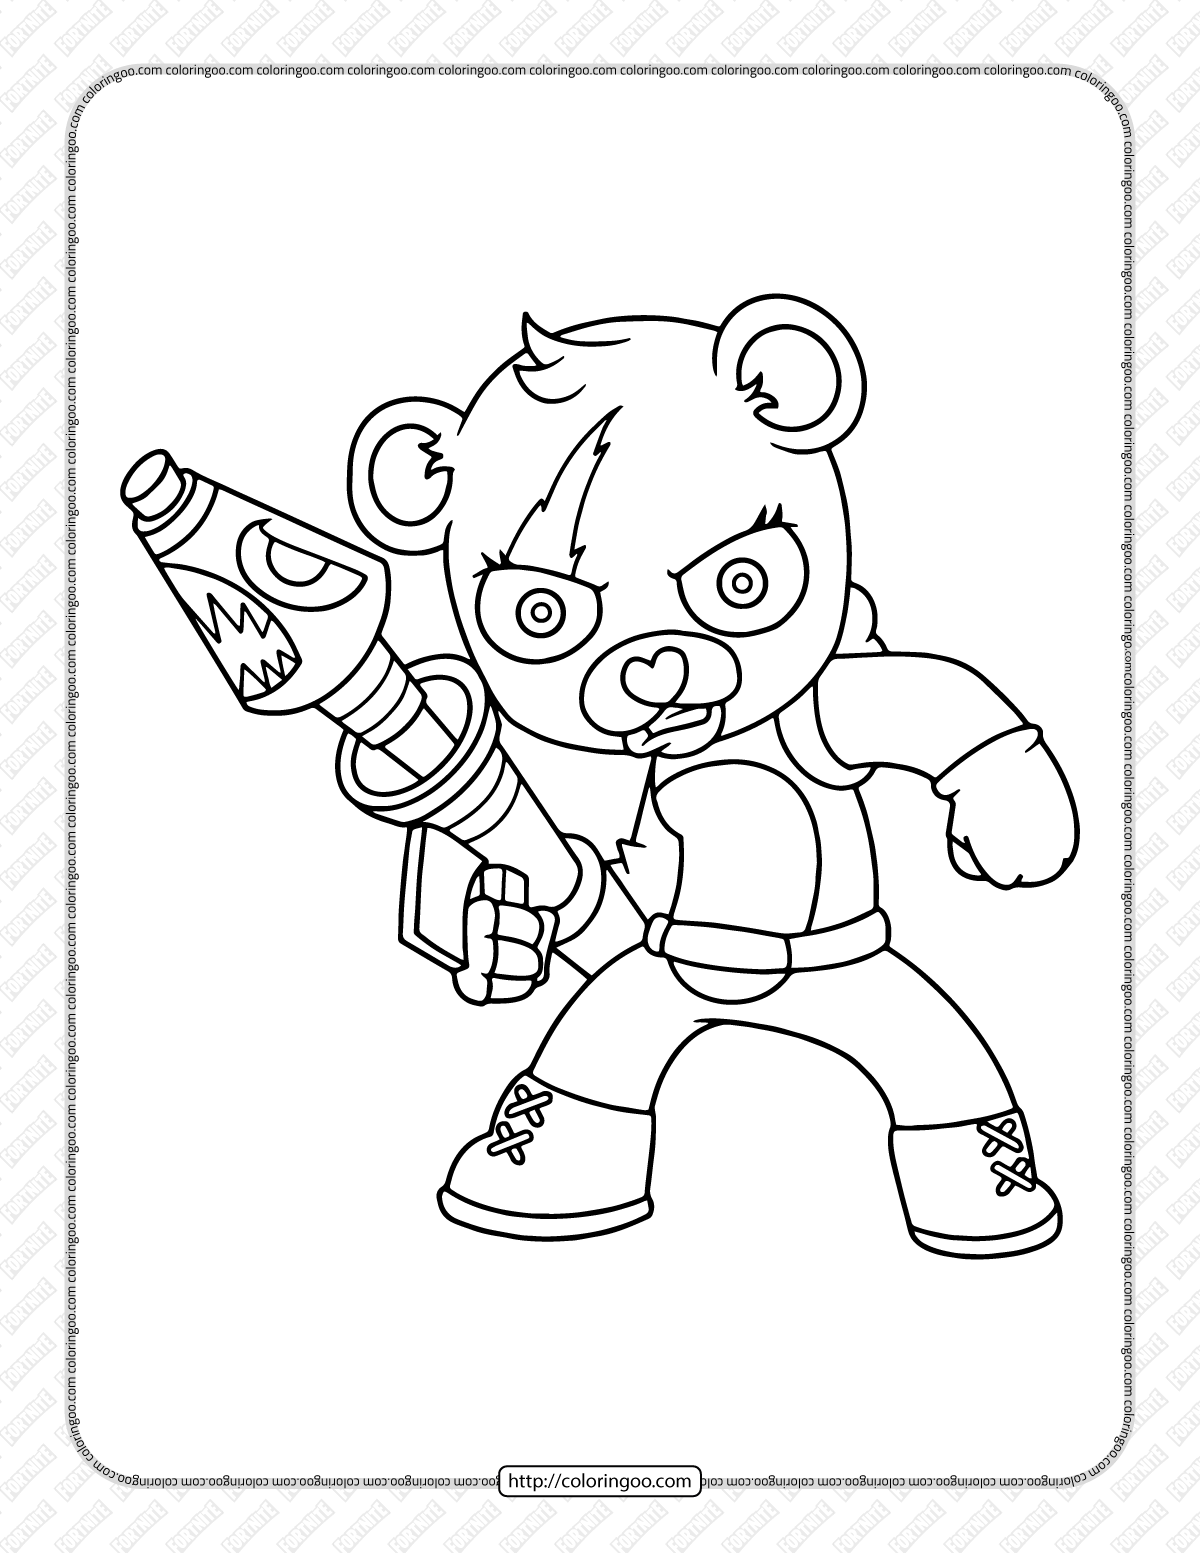 chibi fortnite coloring pages 12